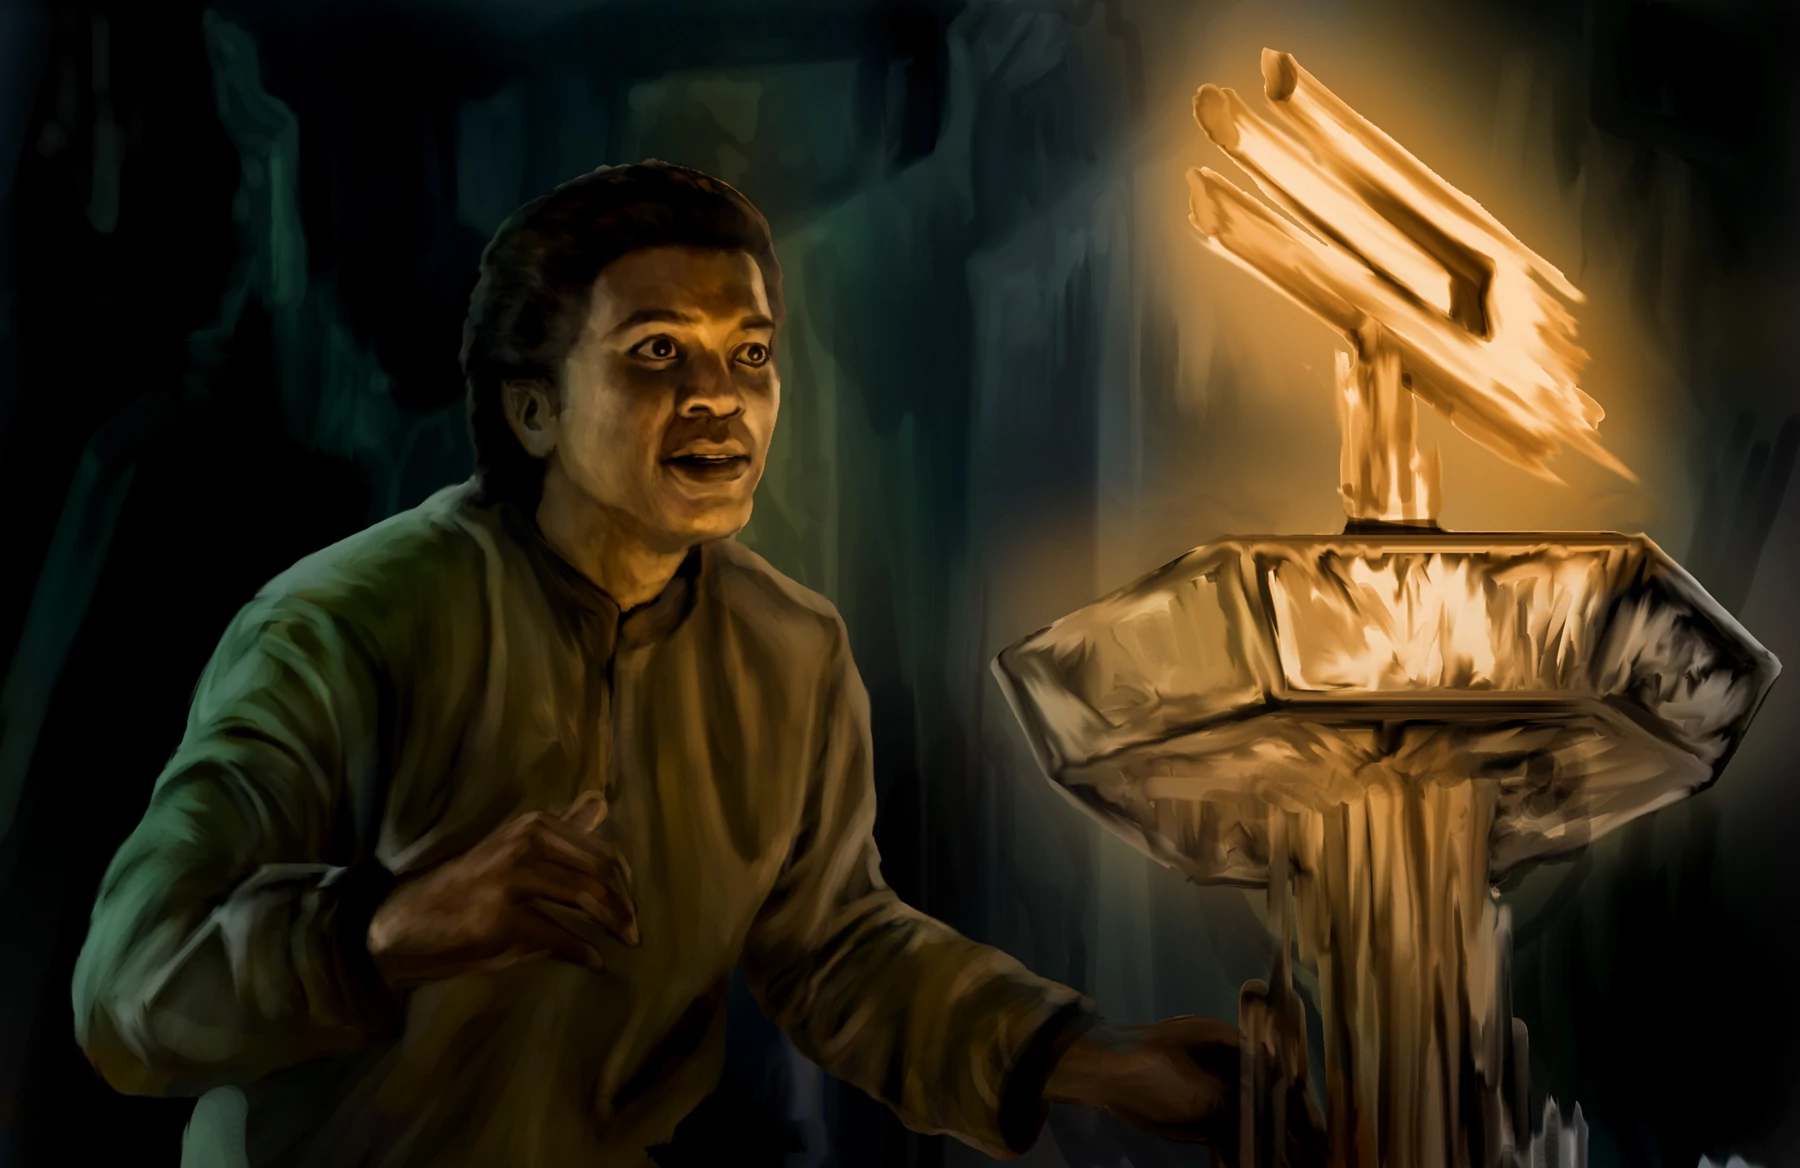 Lando Calrissian And The Mindharp Of Sharu Is One Of The Weirdest Star Wars Stories Ever Told